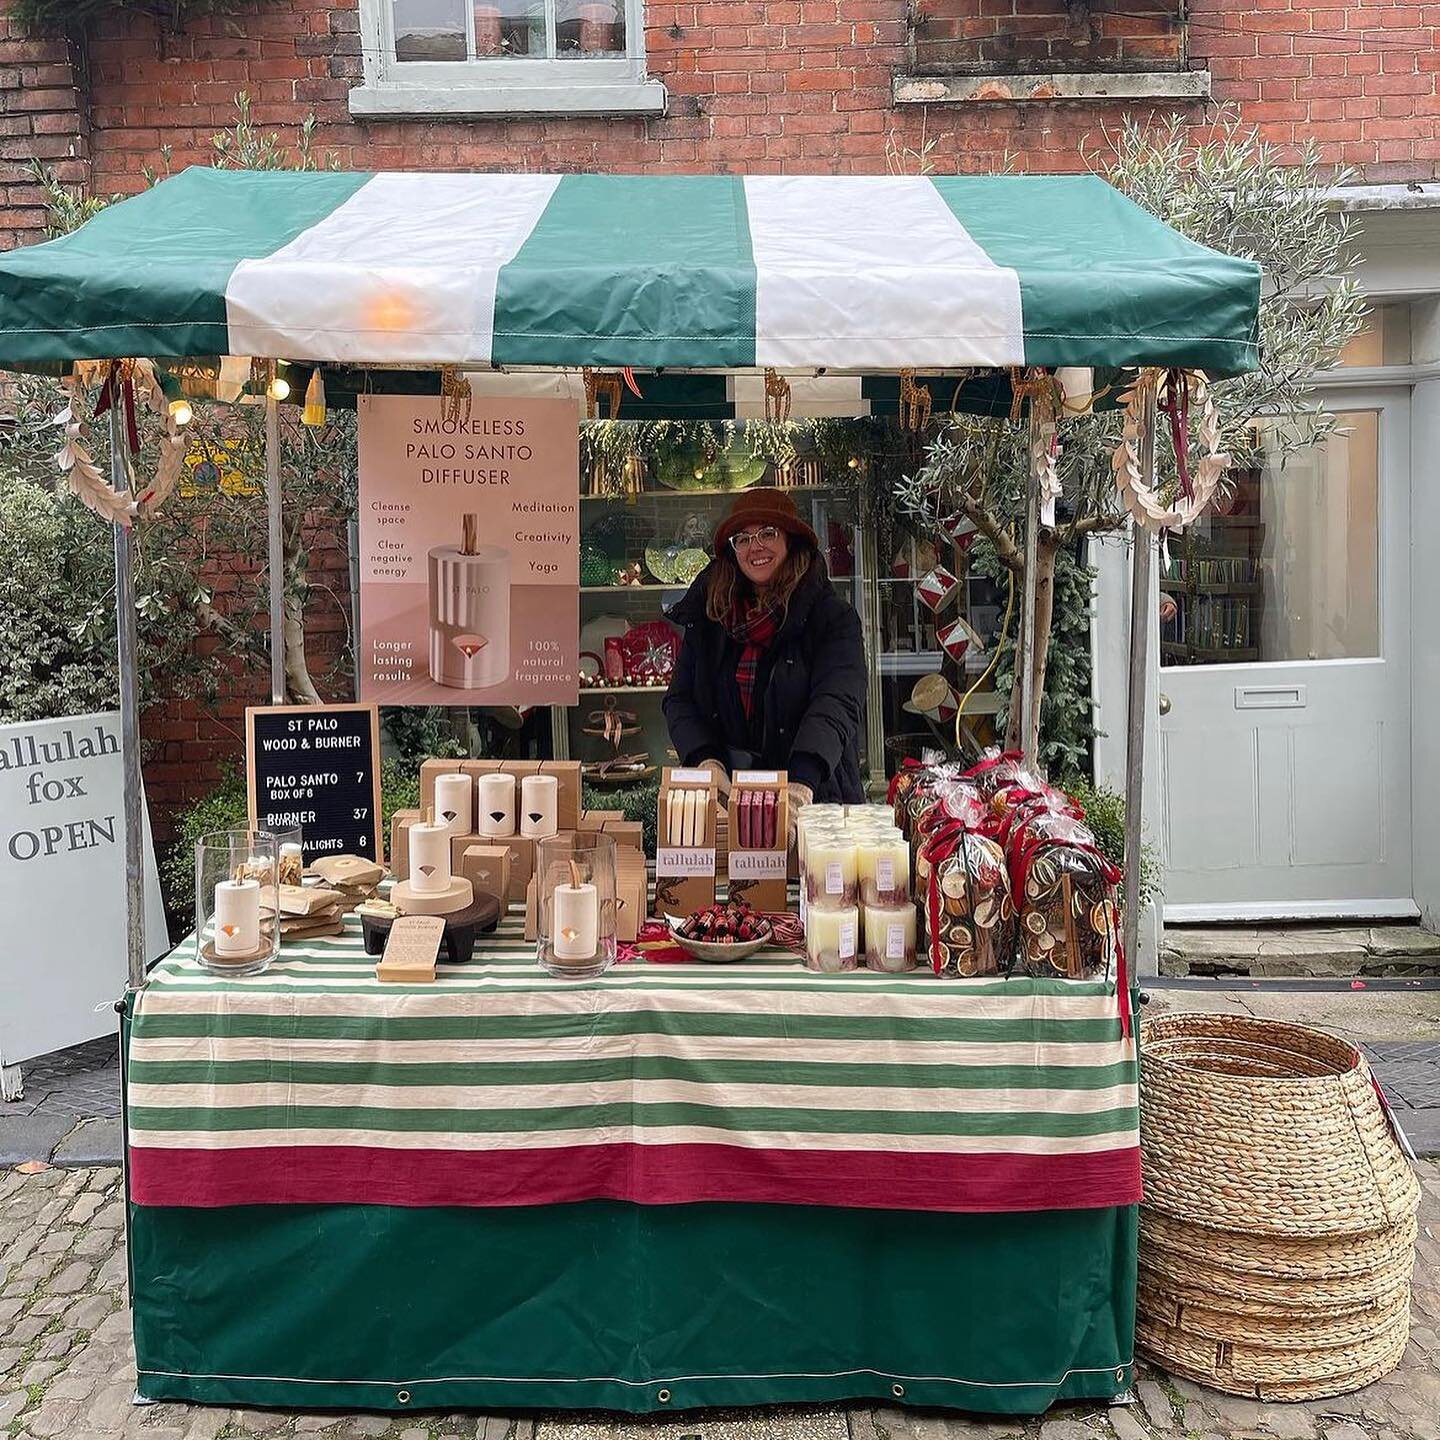 This Sunday just gone I was offered a very last minute Xmas market stand with the lovely @tallulahfoxhome and it was an absolute PLEASURE to have taken part! A huge thank you to anyone who even stopped to chat let alone all of you who went home with 